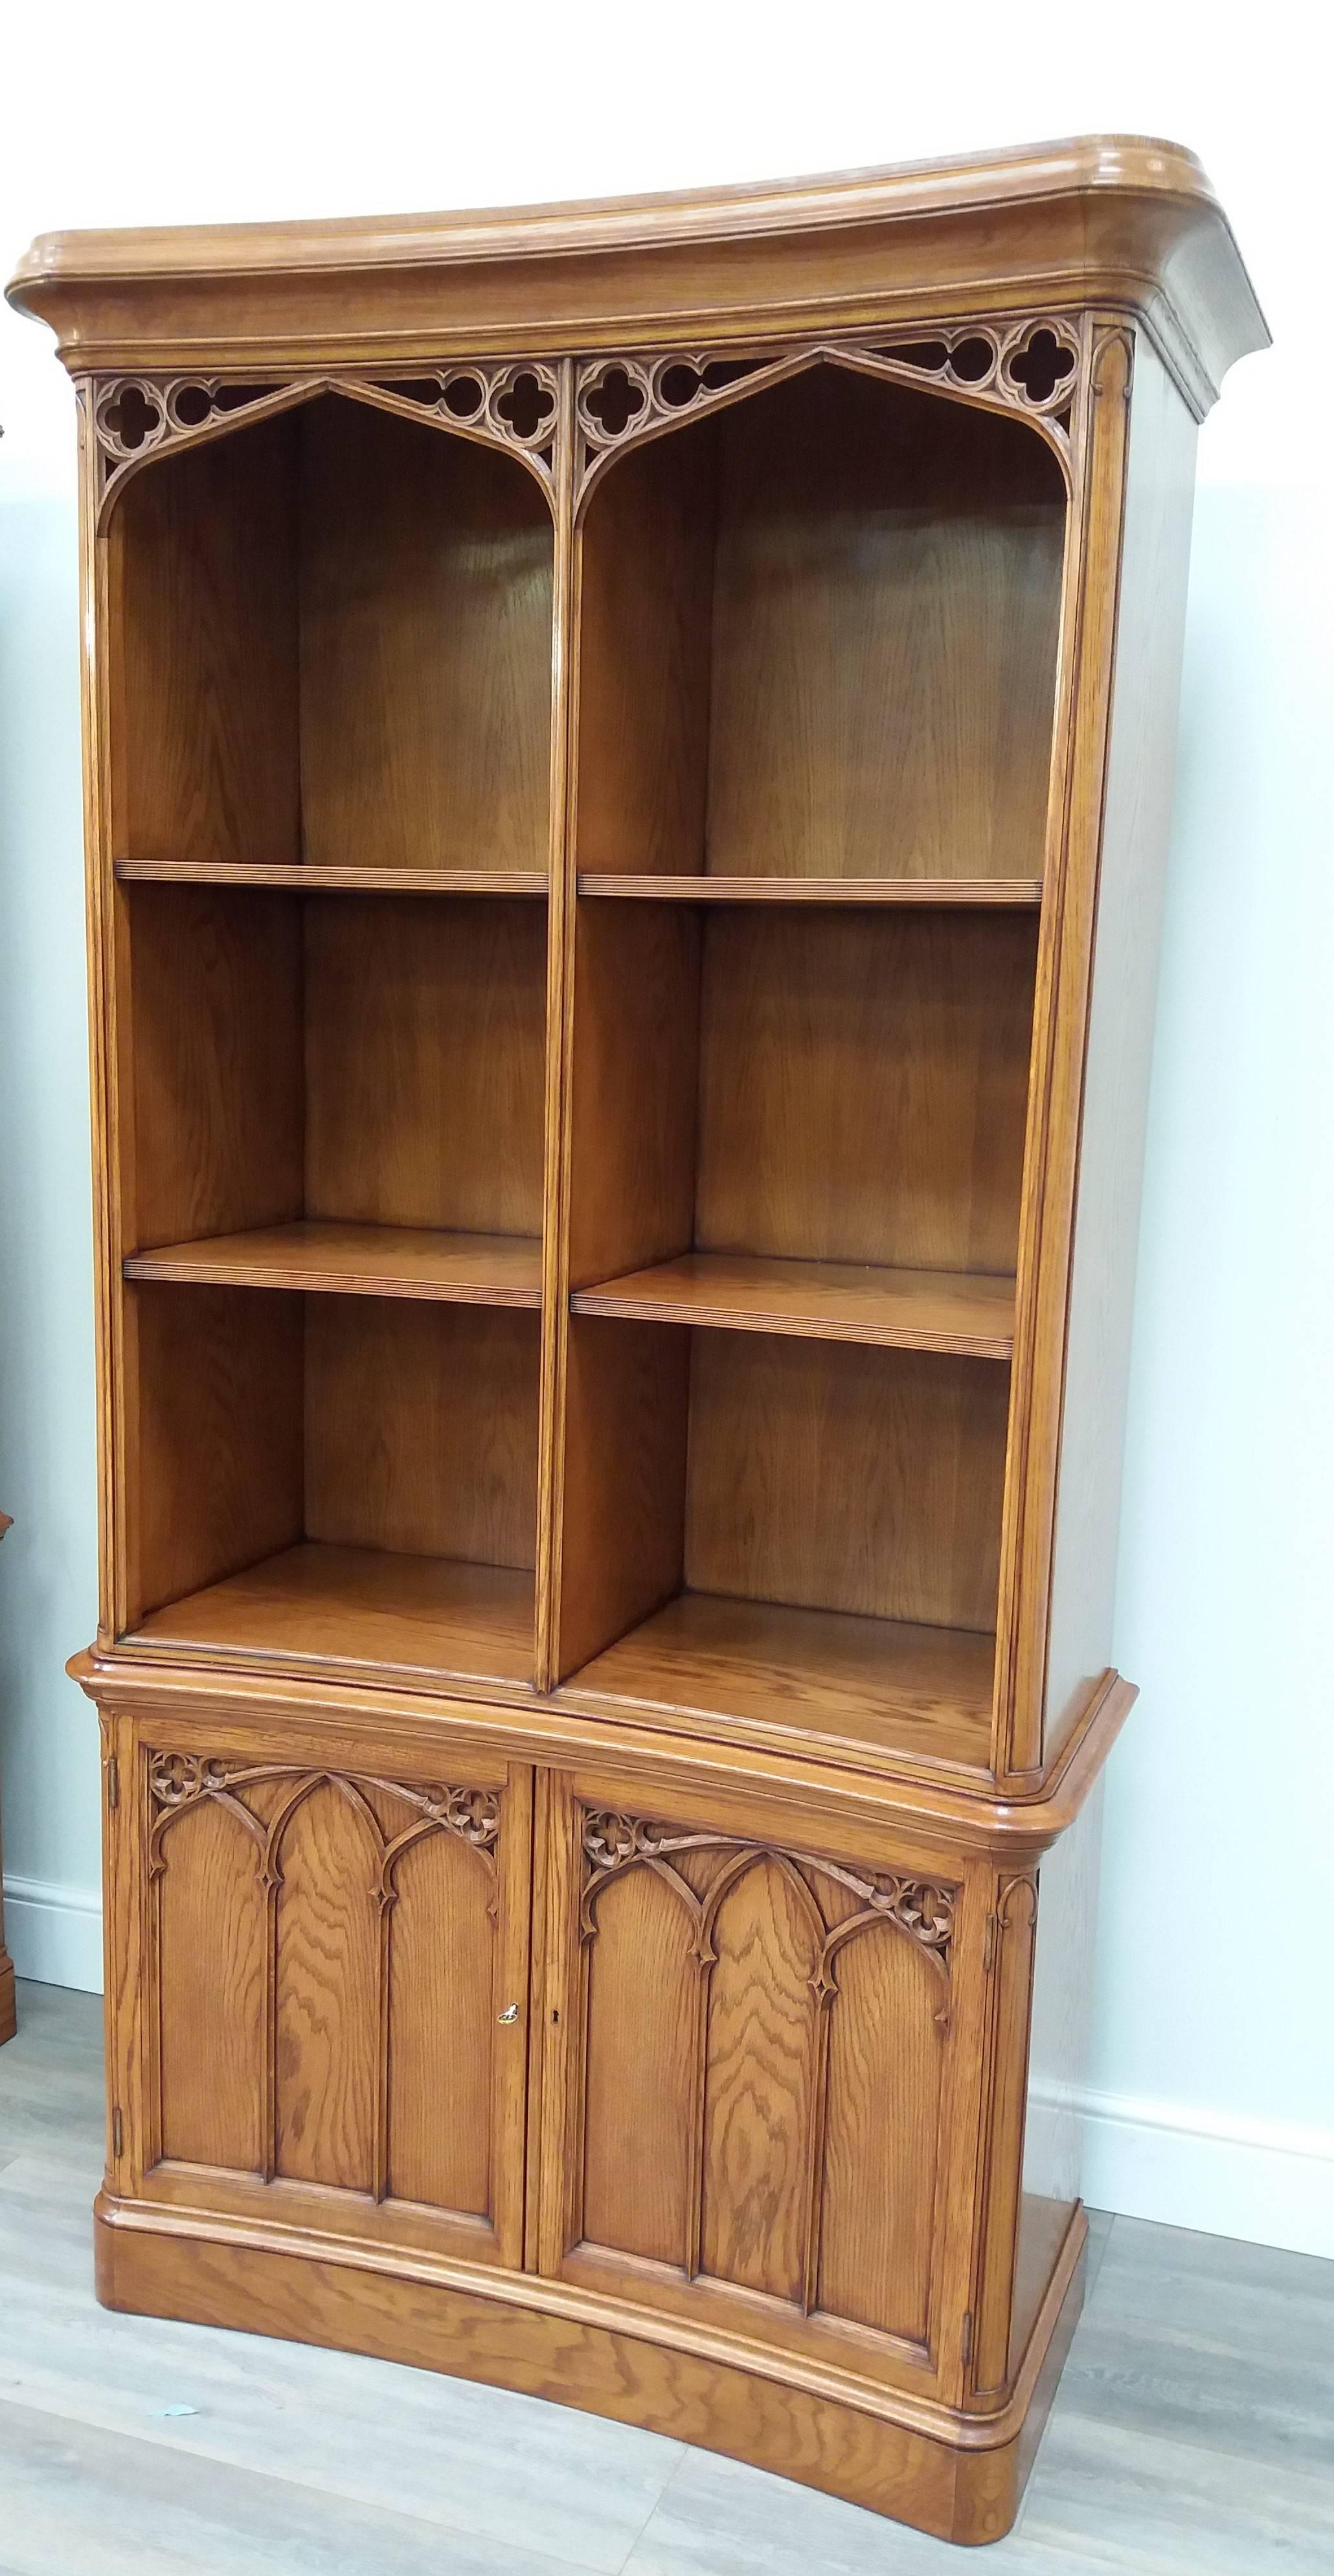 Inspired by a revivalist Gothic design of the 1840's, this magnificent oak bookcase features a slightly concave front and ornate tracery work to the pediment and lower cupboard doors.  The upper section is open fronted (as was the original) and